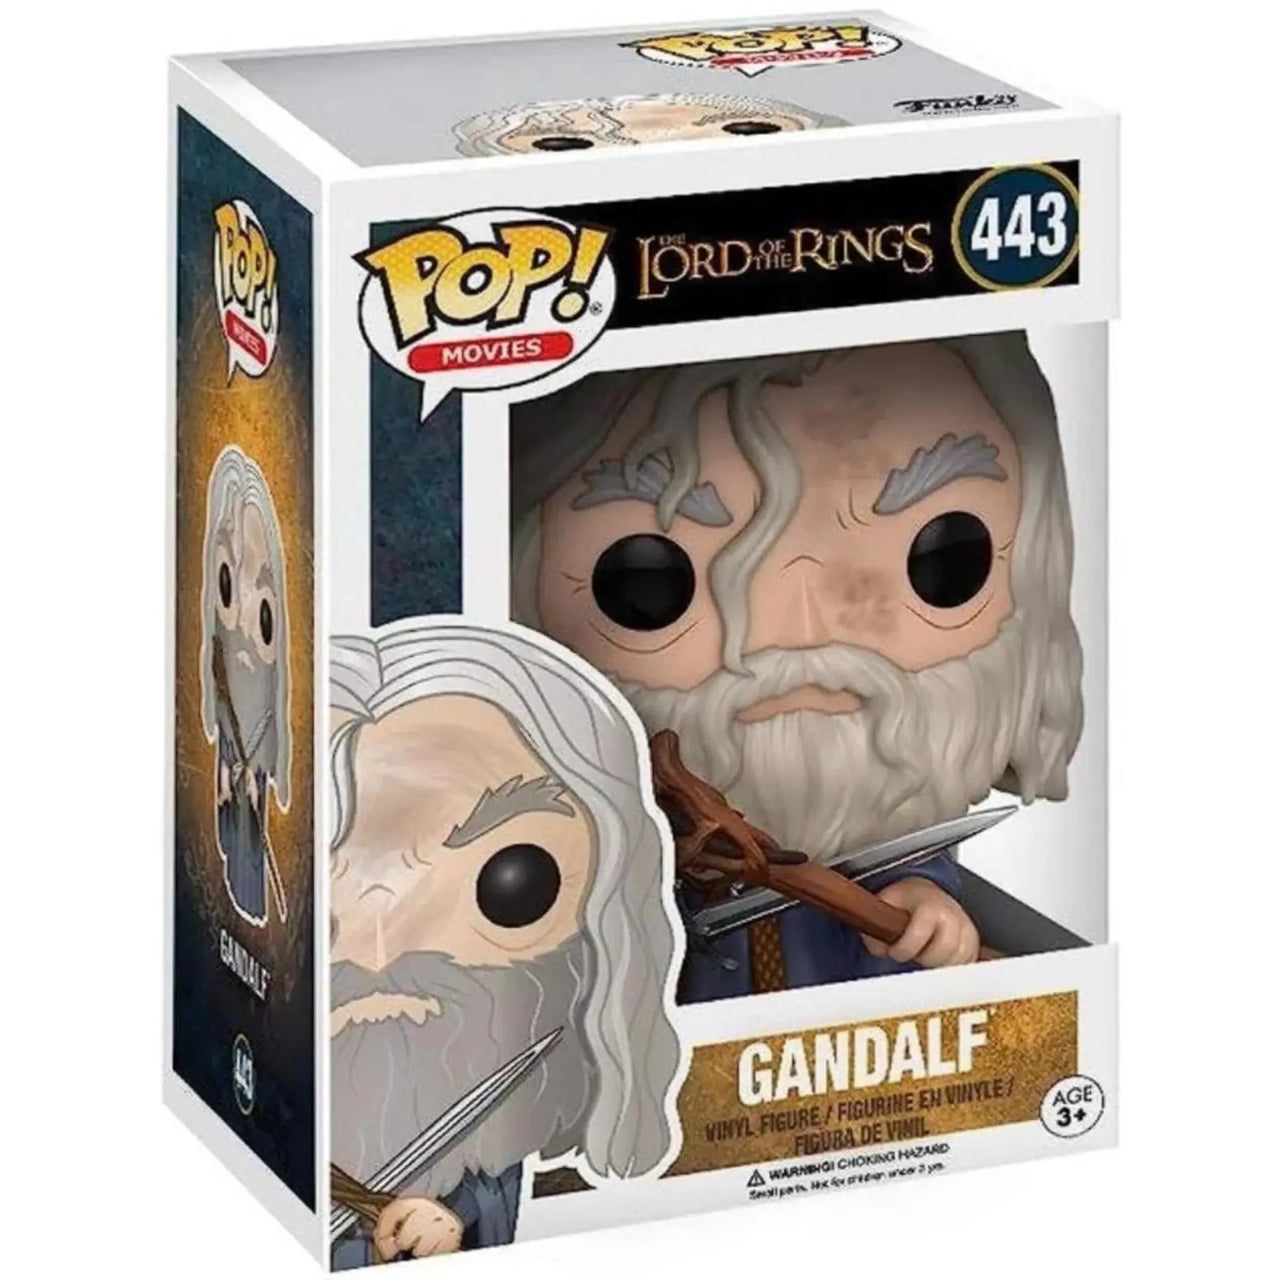 Funko Pop! Movies the Lord of the Rings 443 Gandalf Funko